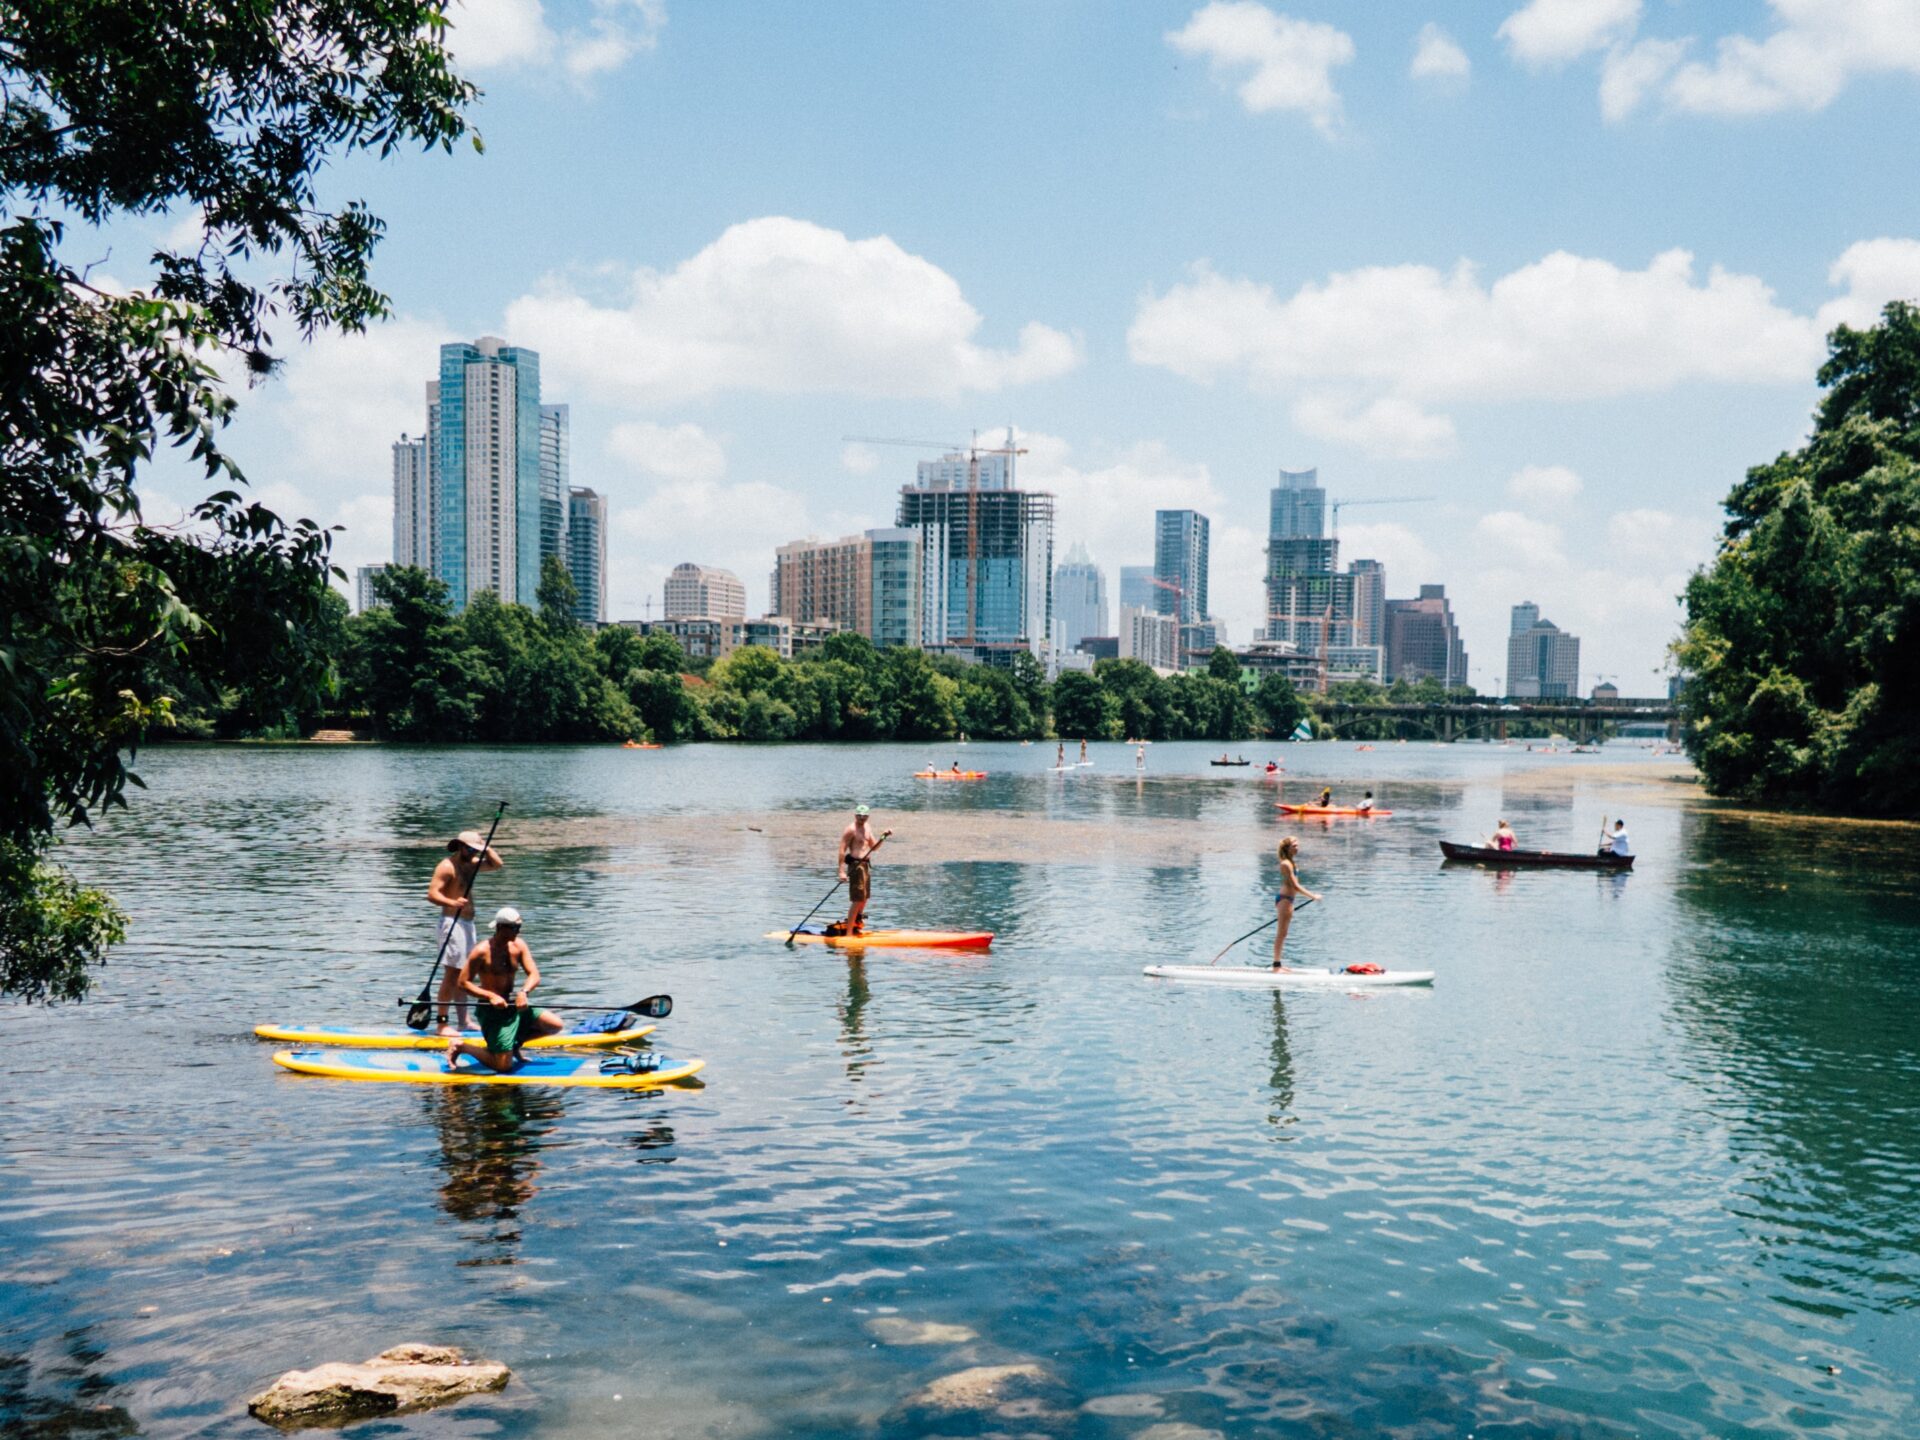 A group of people stand up paddle boarding in a river.